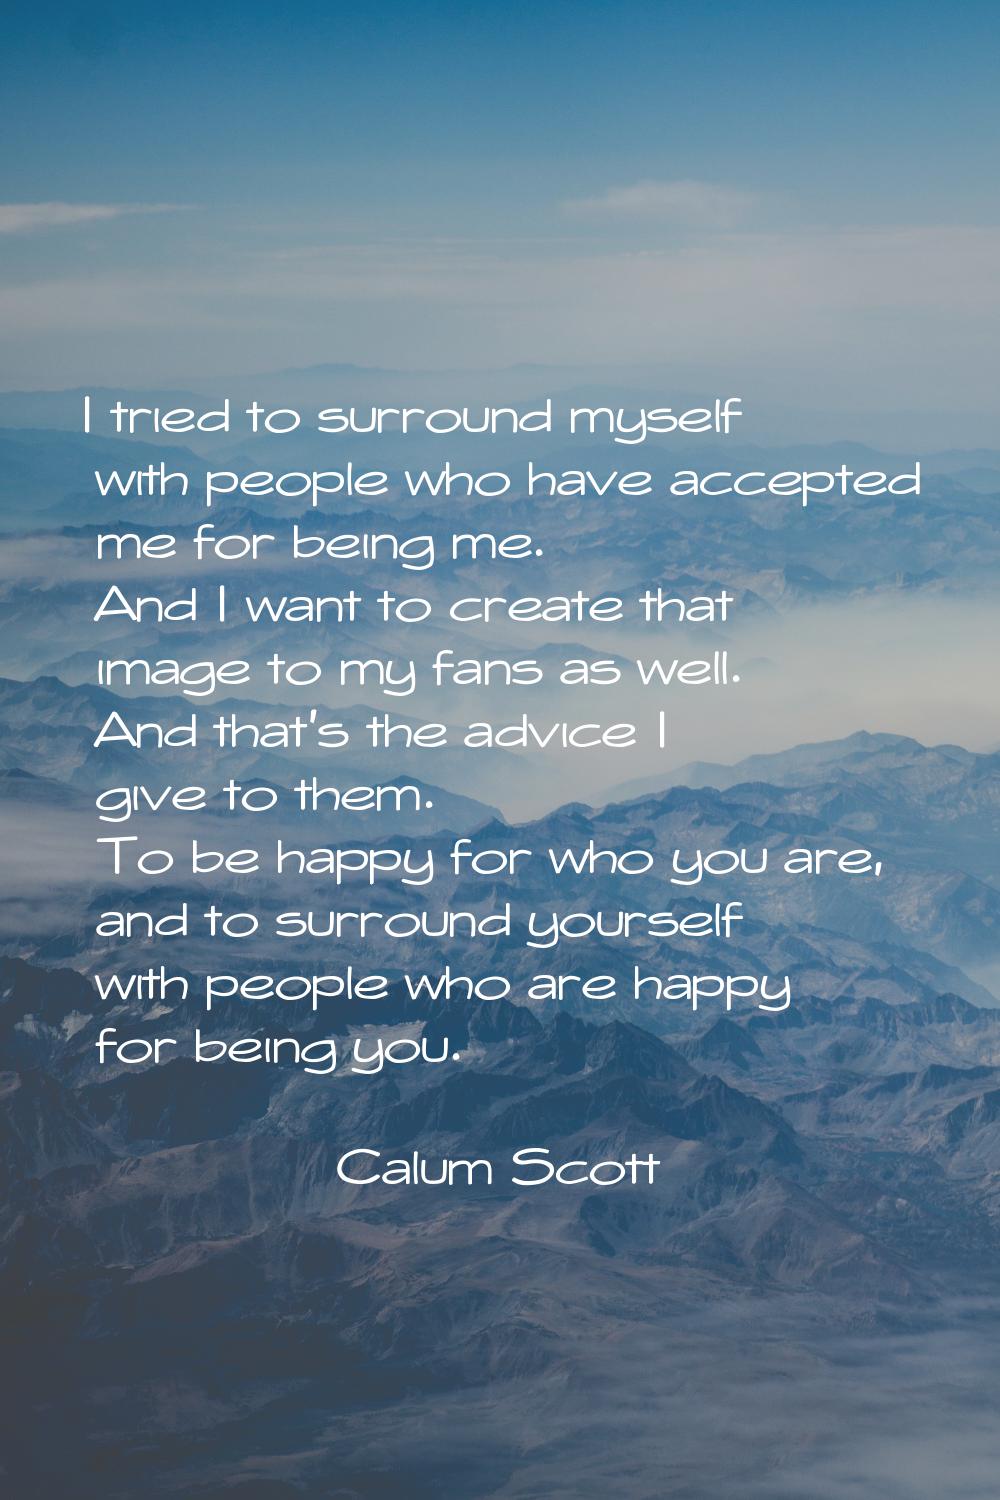 I tried to surround myself with people who have accepted me for being me. And I want to create that